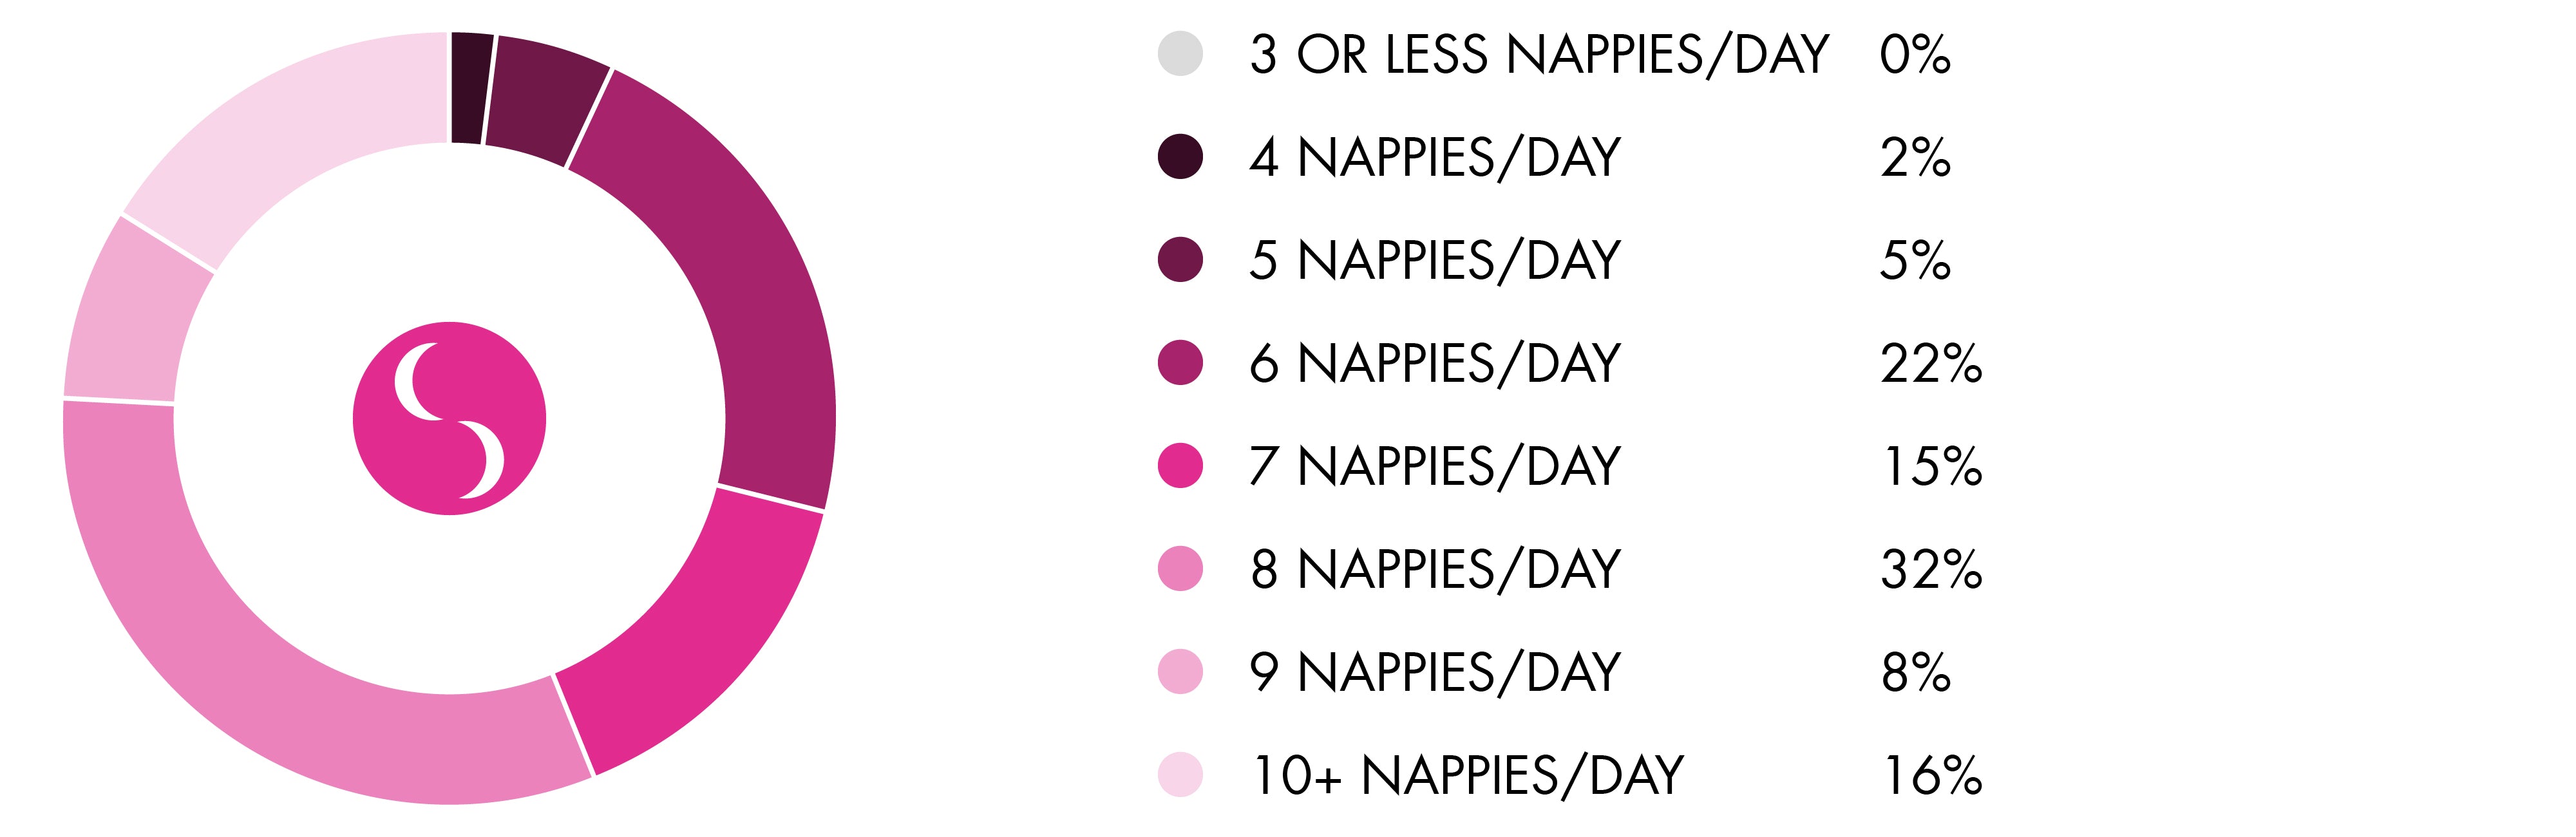 how-many-nappies-per-day